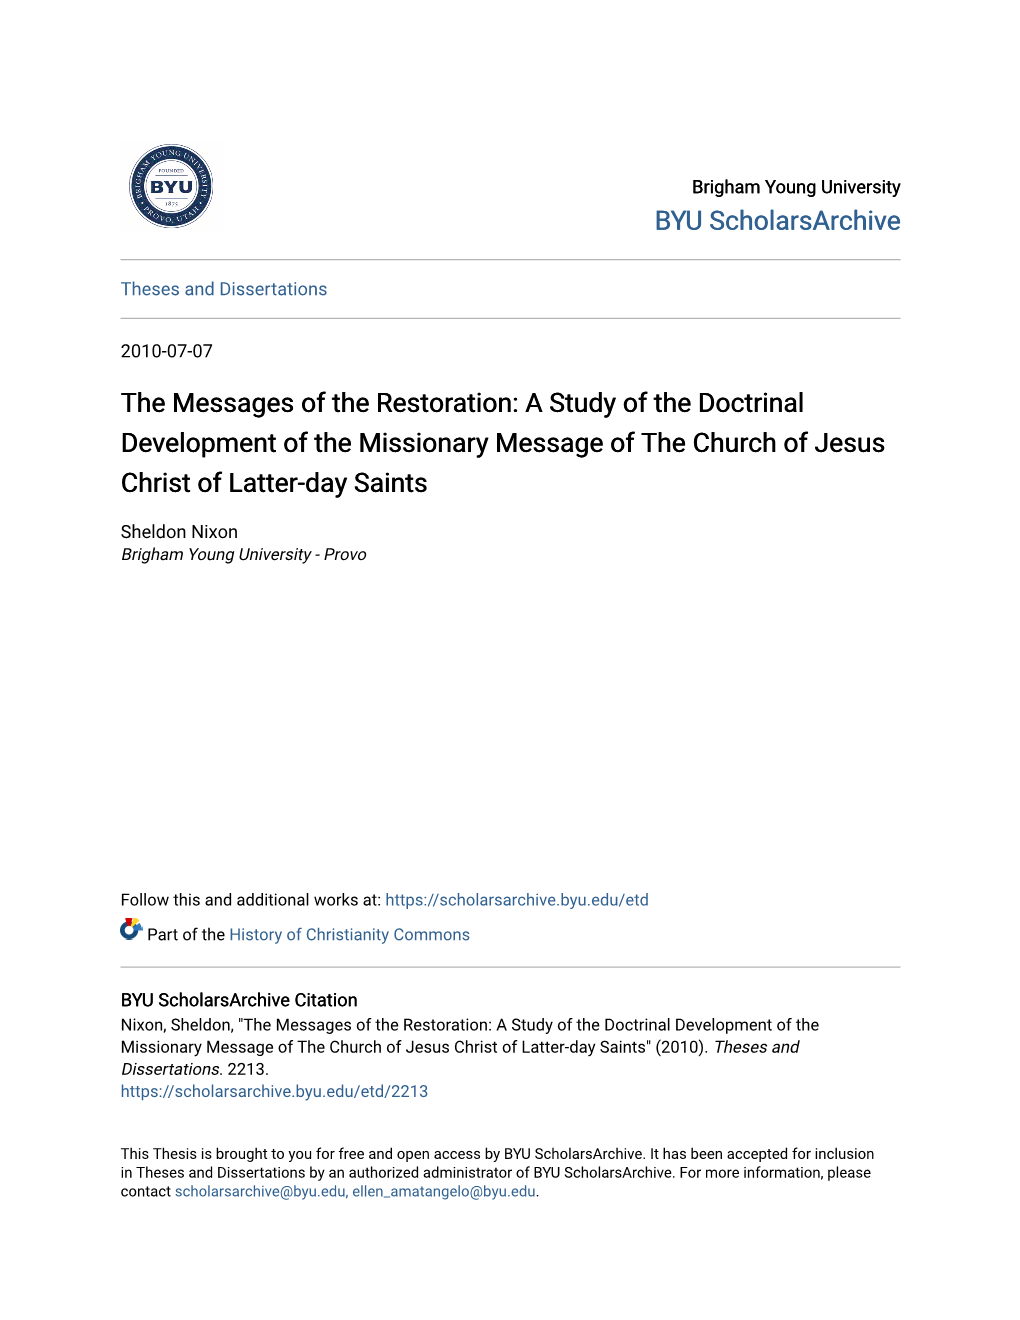 The Messages of the Restoration: a Study of the Doctrinal Development of the Missionary Message of the Church of Jesus Christ of Latter-Day Saints